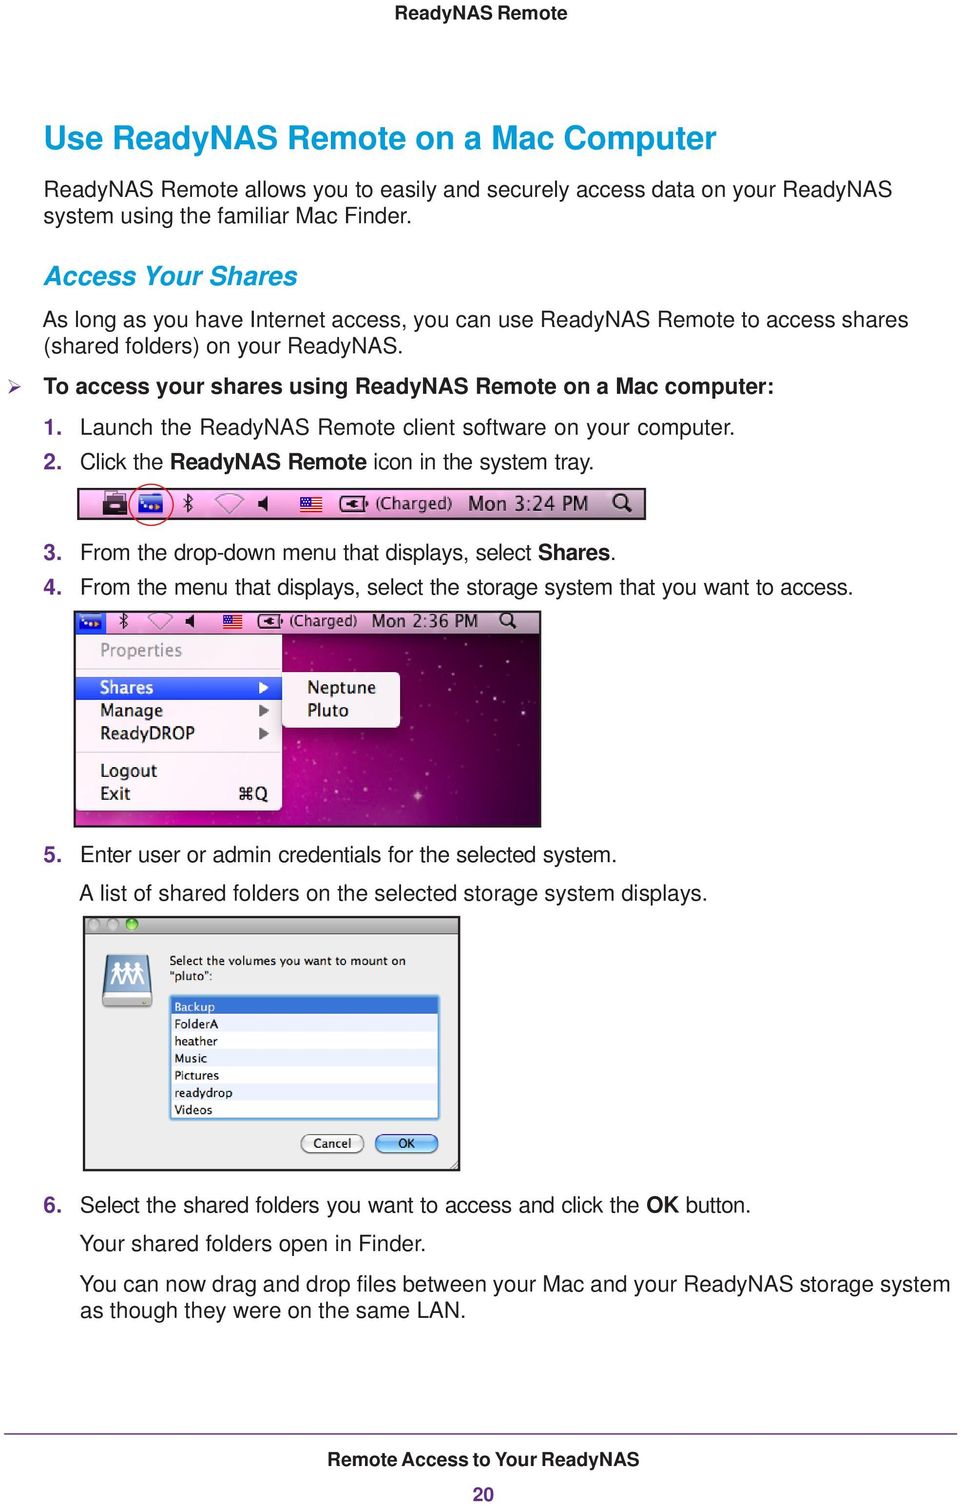 To access your shares using ReadyNAS Remote on a Mac computer: 1. Launch the ReadyNAS Remote client software on your computer. 2. Click the ReadyNAS Remote icon in the system tray. 3.